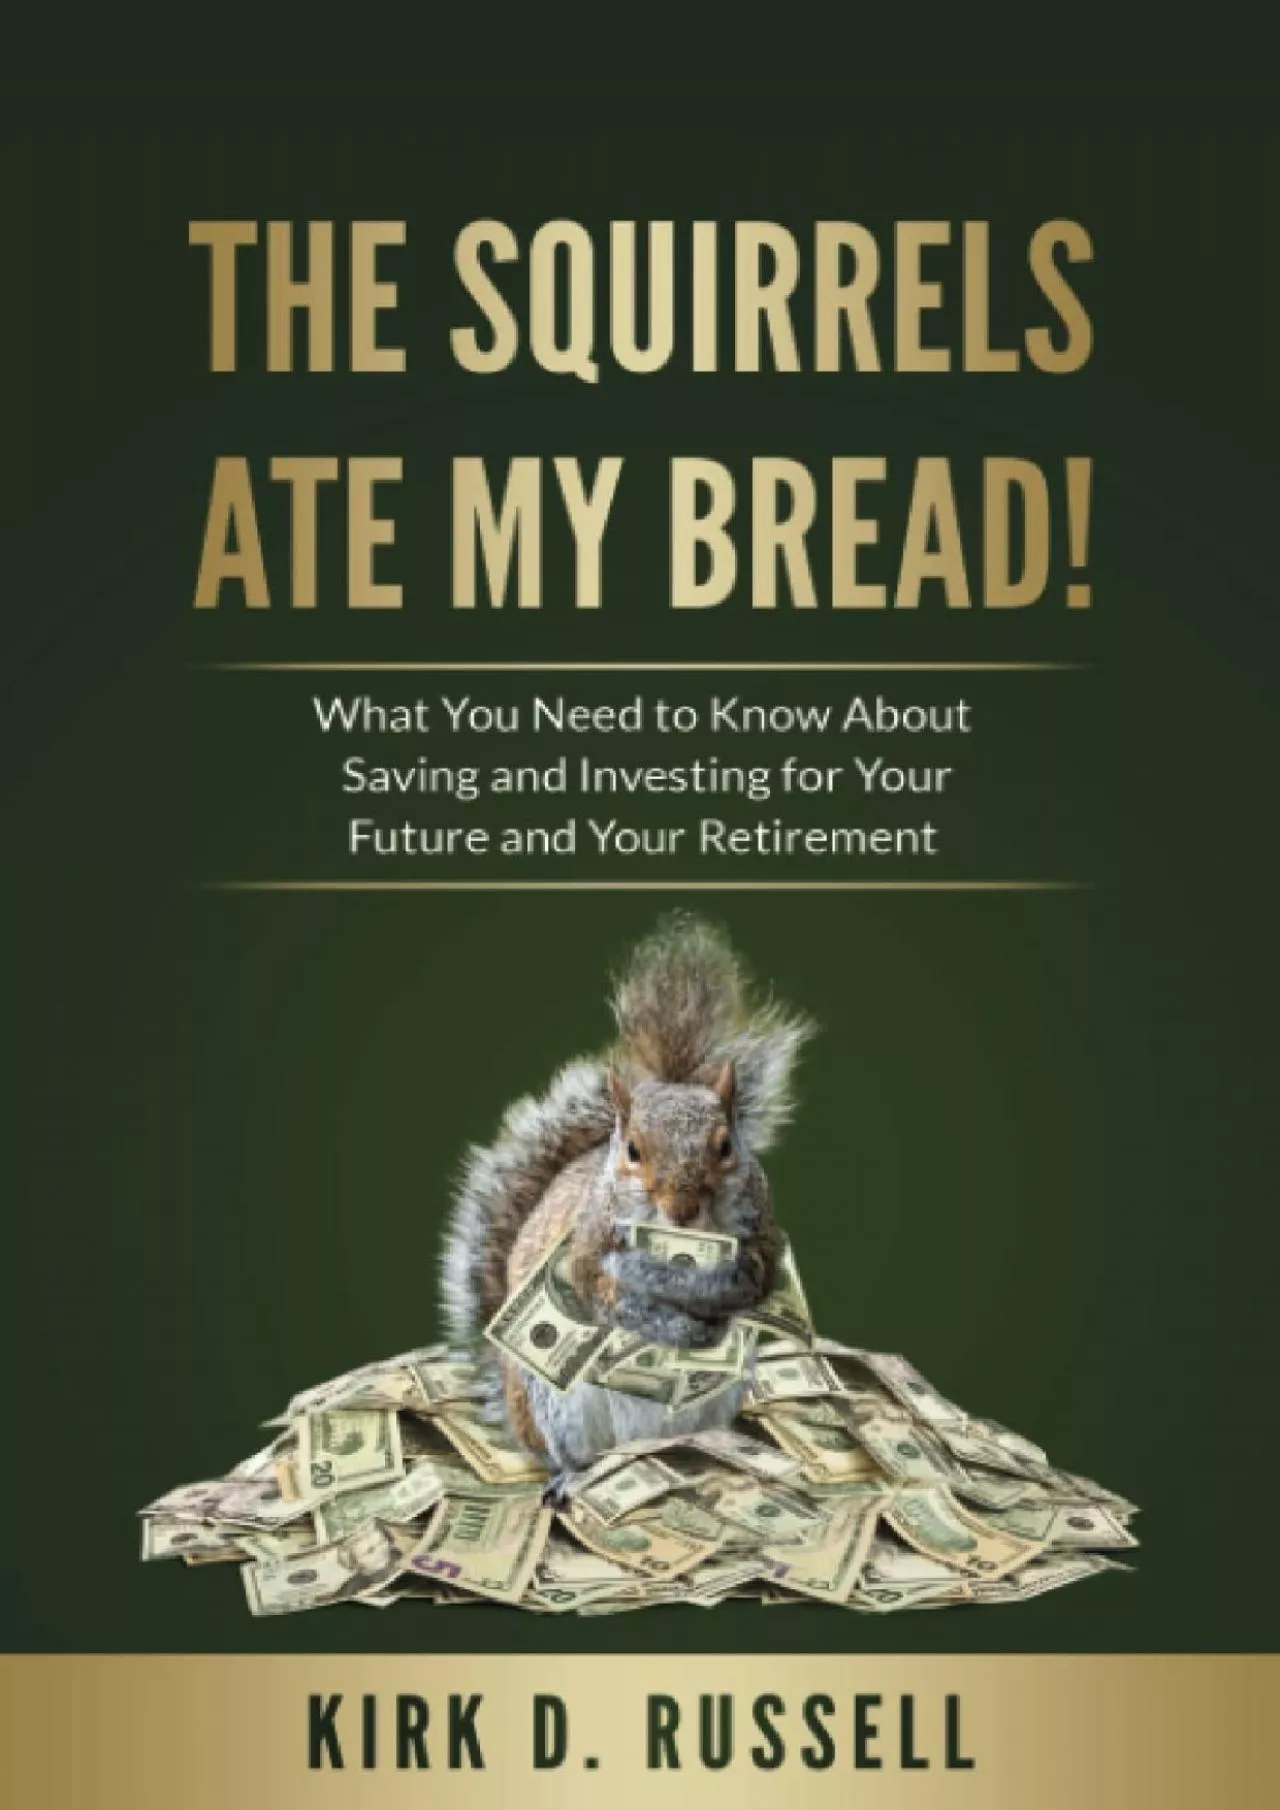 The Squirrels Ate My Bread: What You Need to Know About Saving and Investing For Your